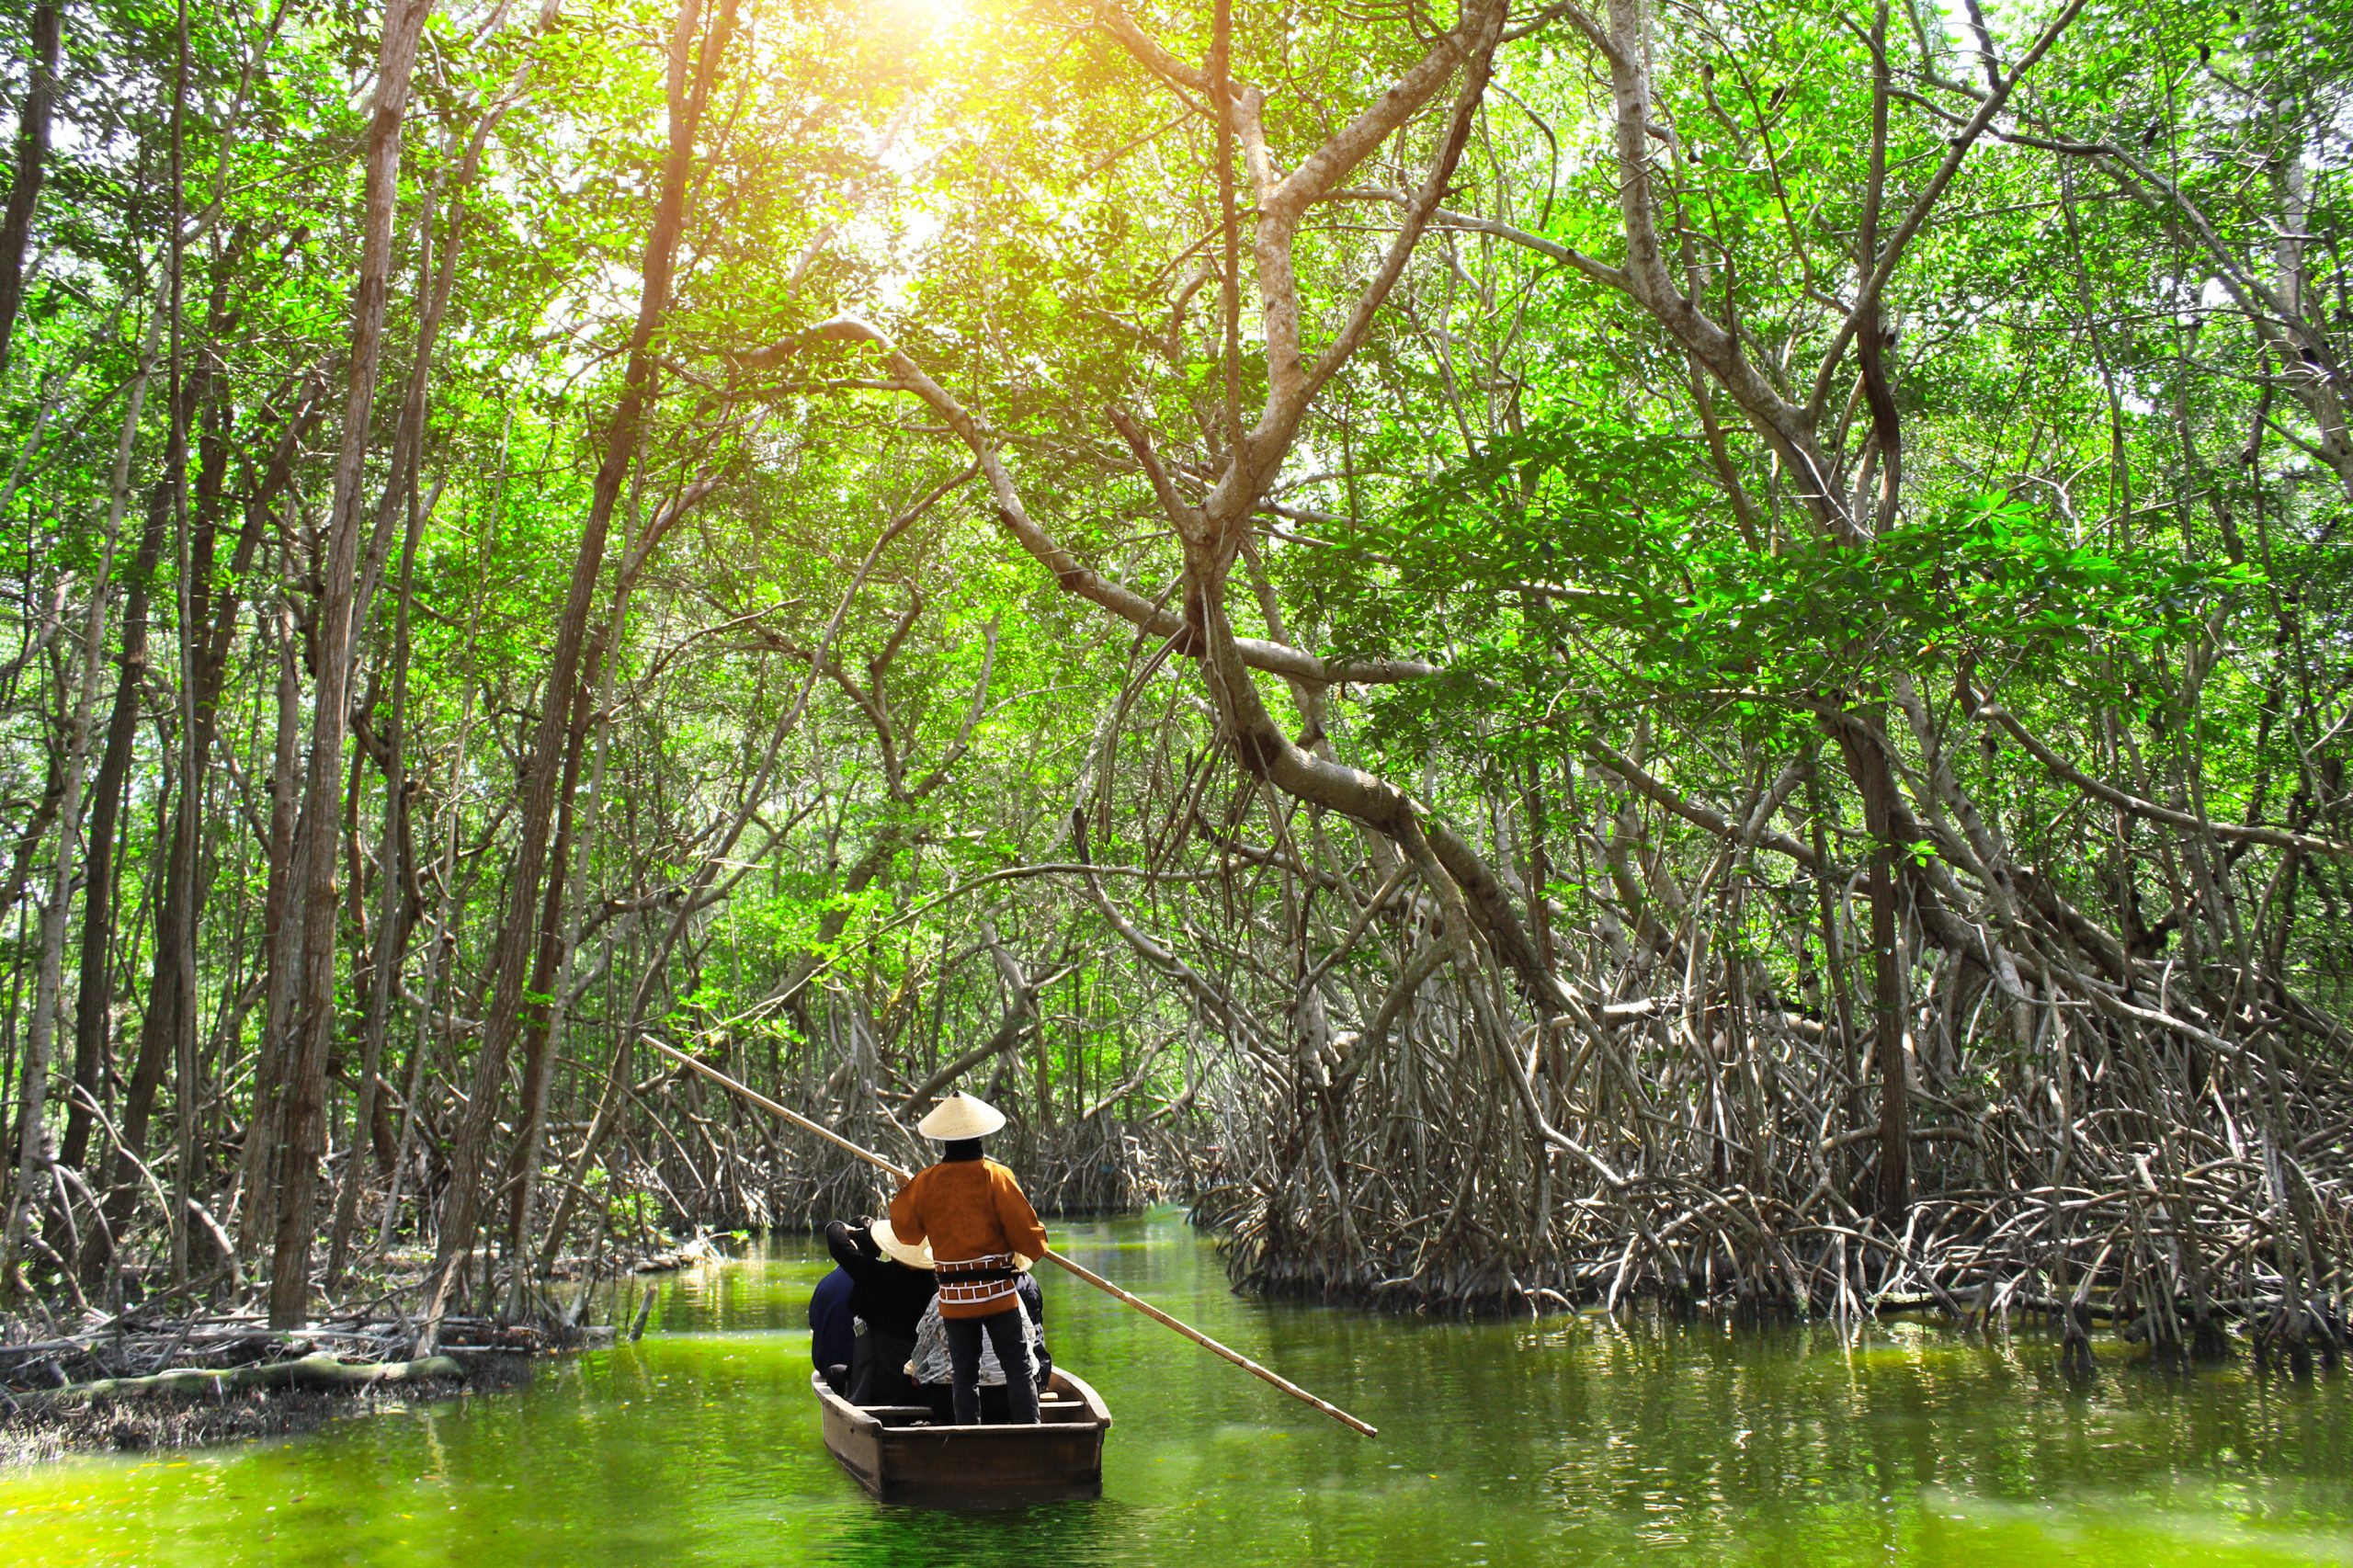 People boating in mangrove forest, Malaysia, Asia